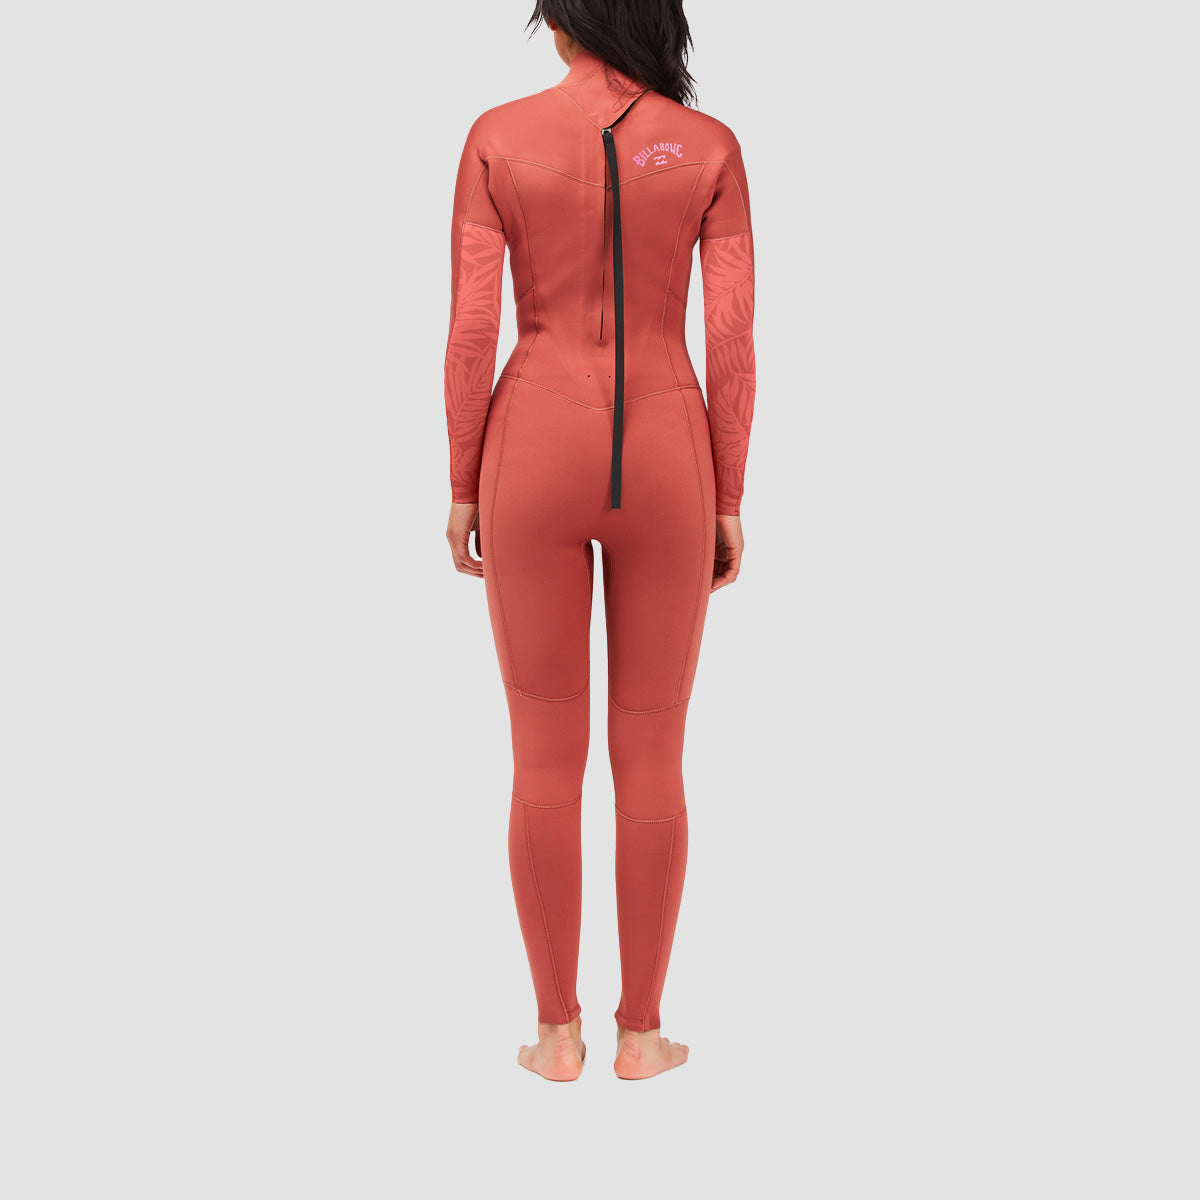 Billabong 5/4mm Synergy Back Zip Wetsuit Red Clay - Womens